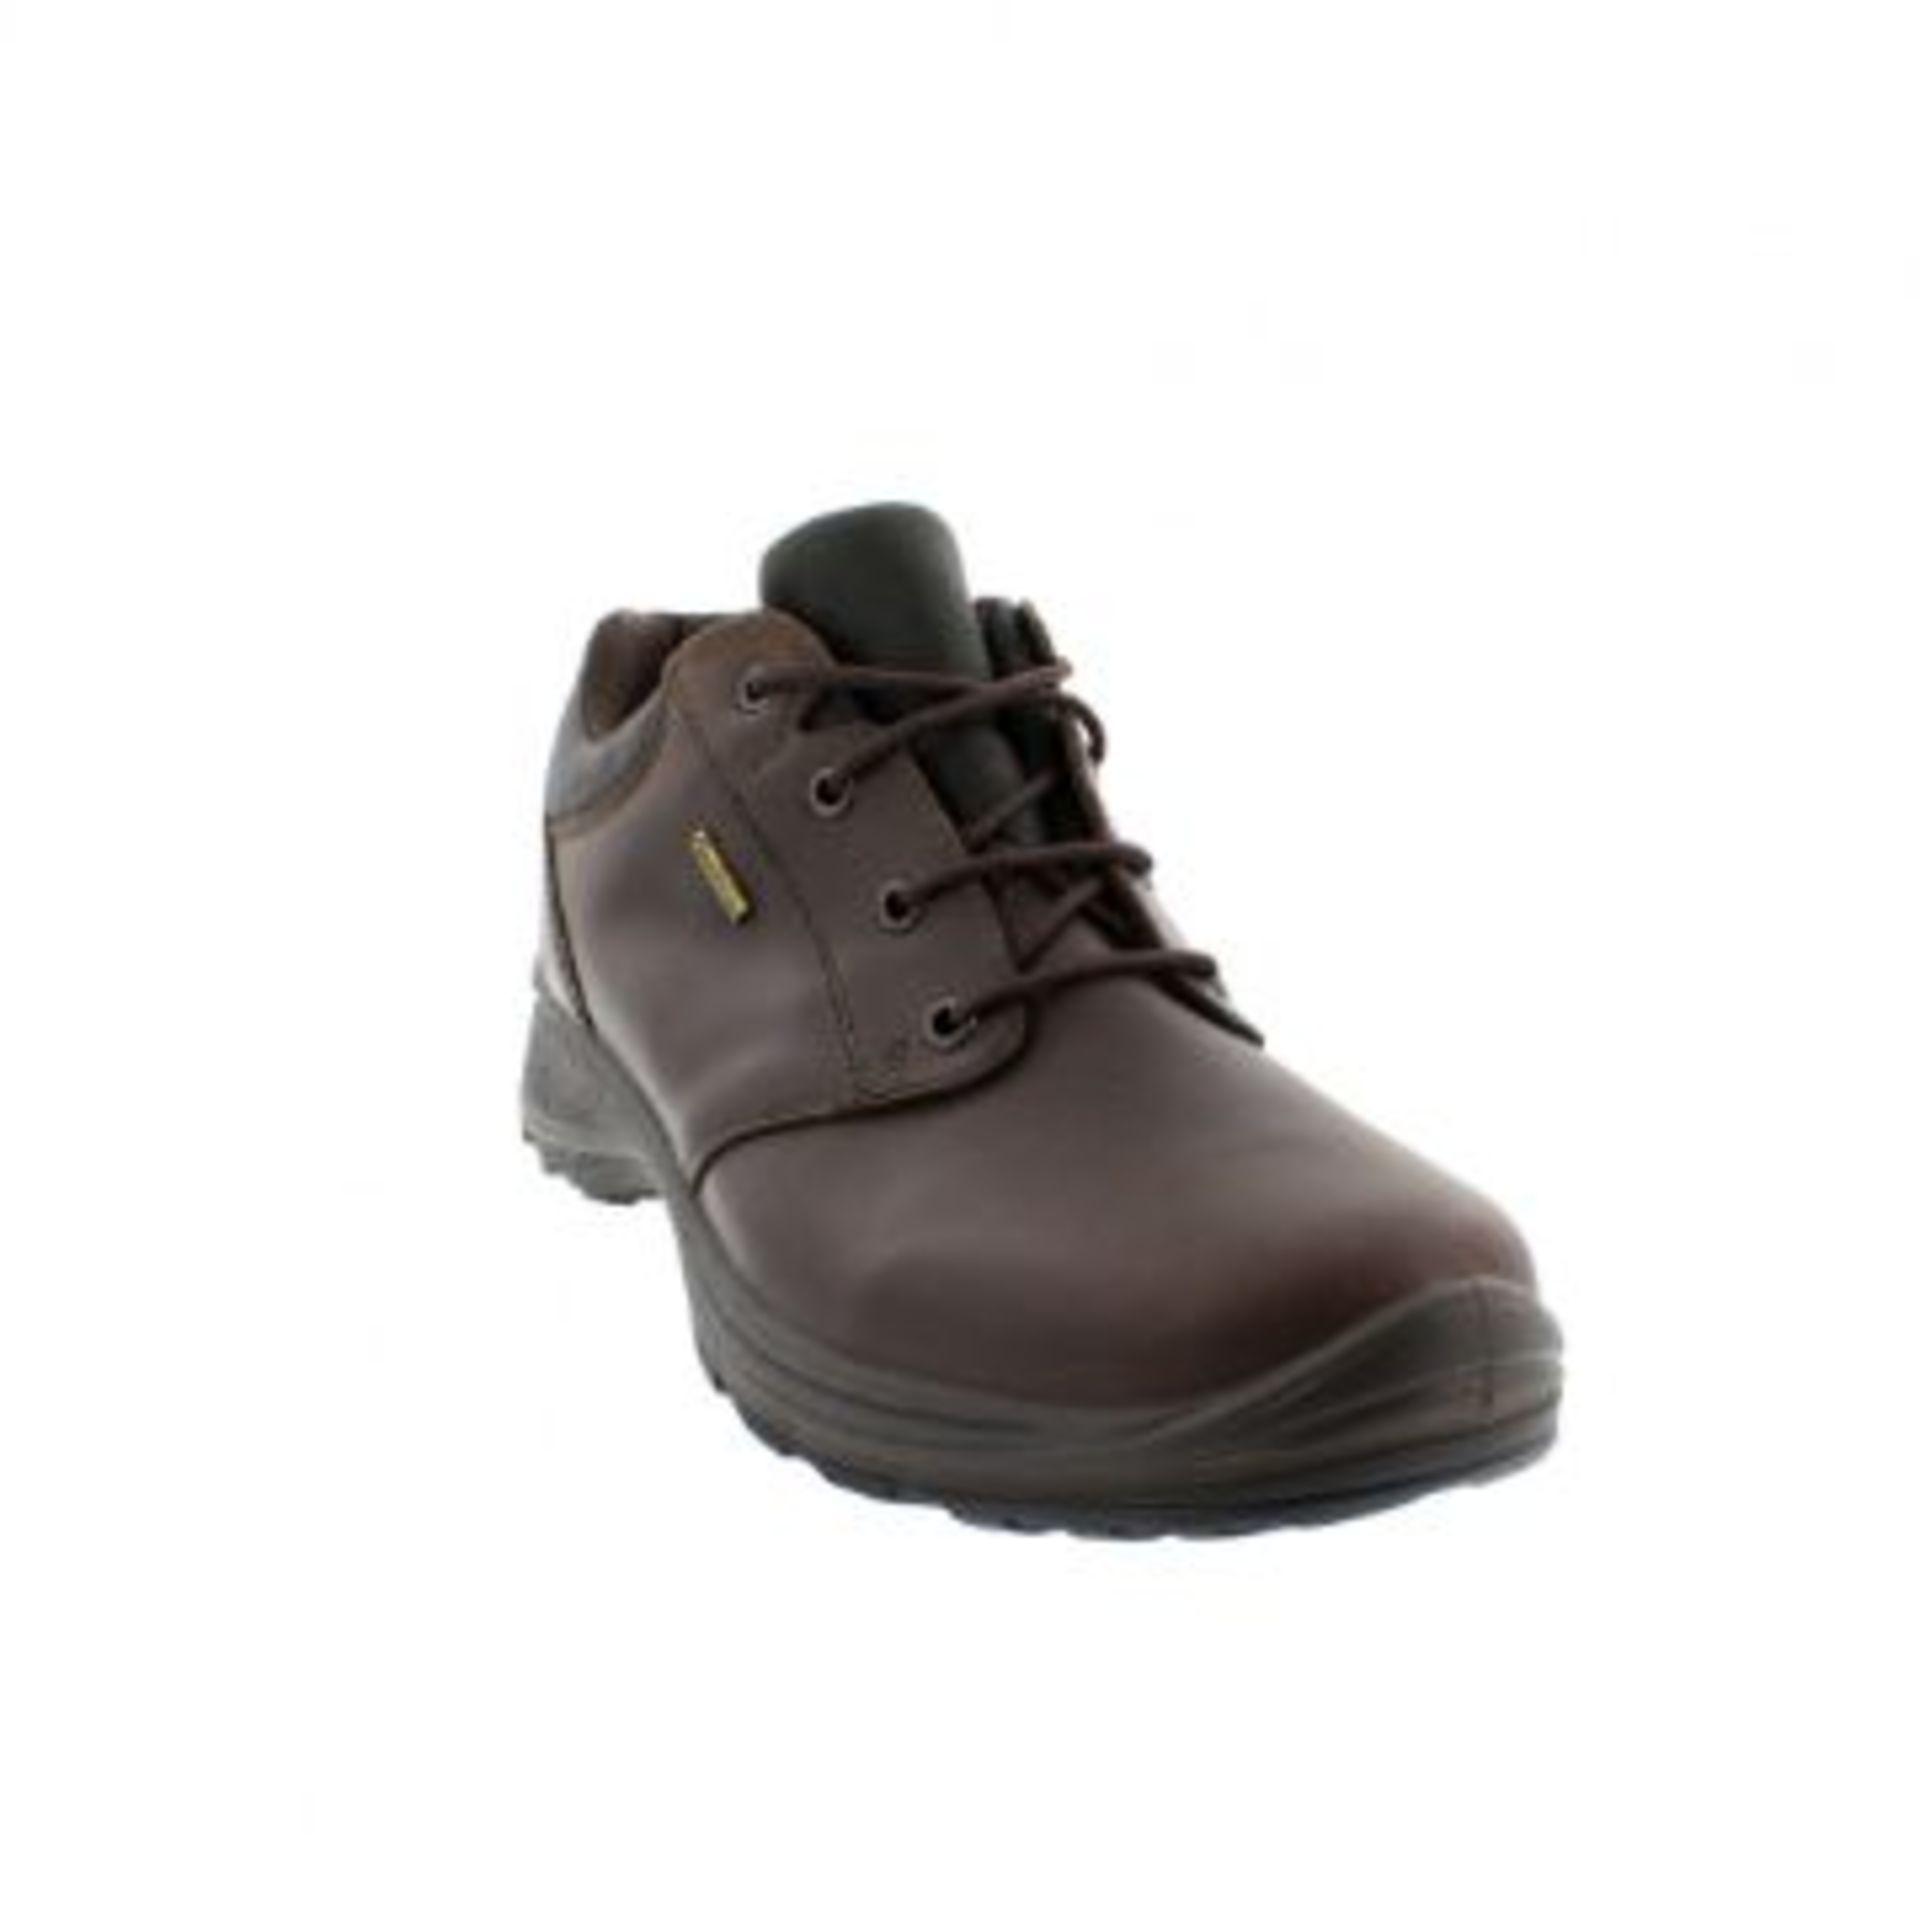 1 x Pair of Men's Grisport Brown Leather GriTex Shoes - Rogerson Footwear - Brand New and Boxed - - Image 2 of 6